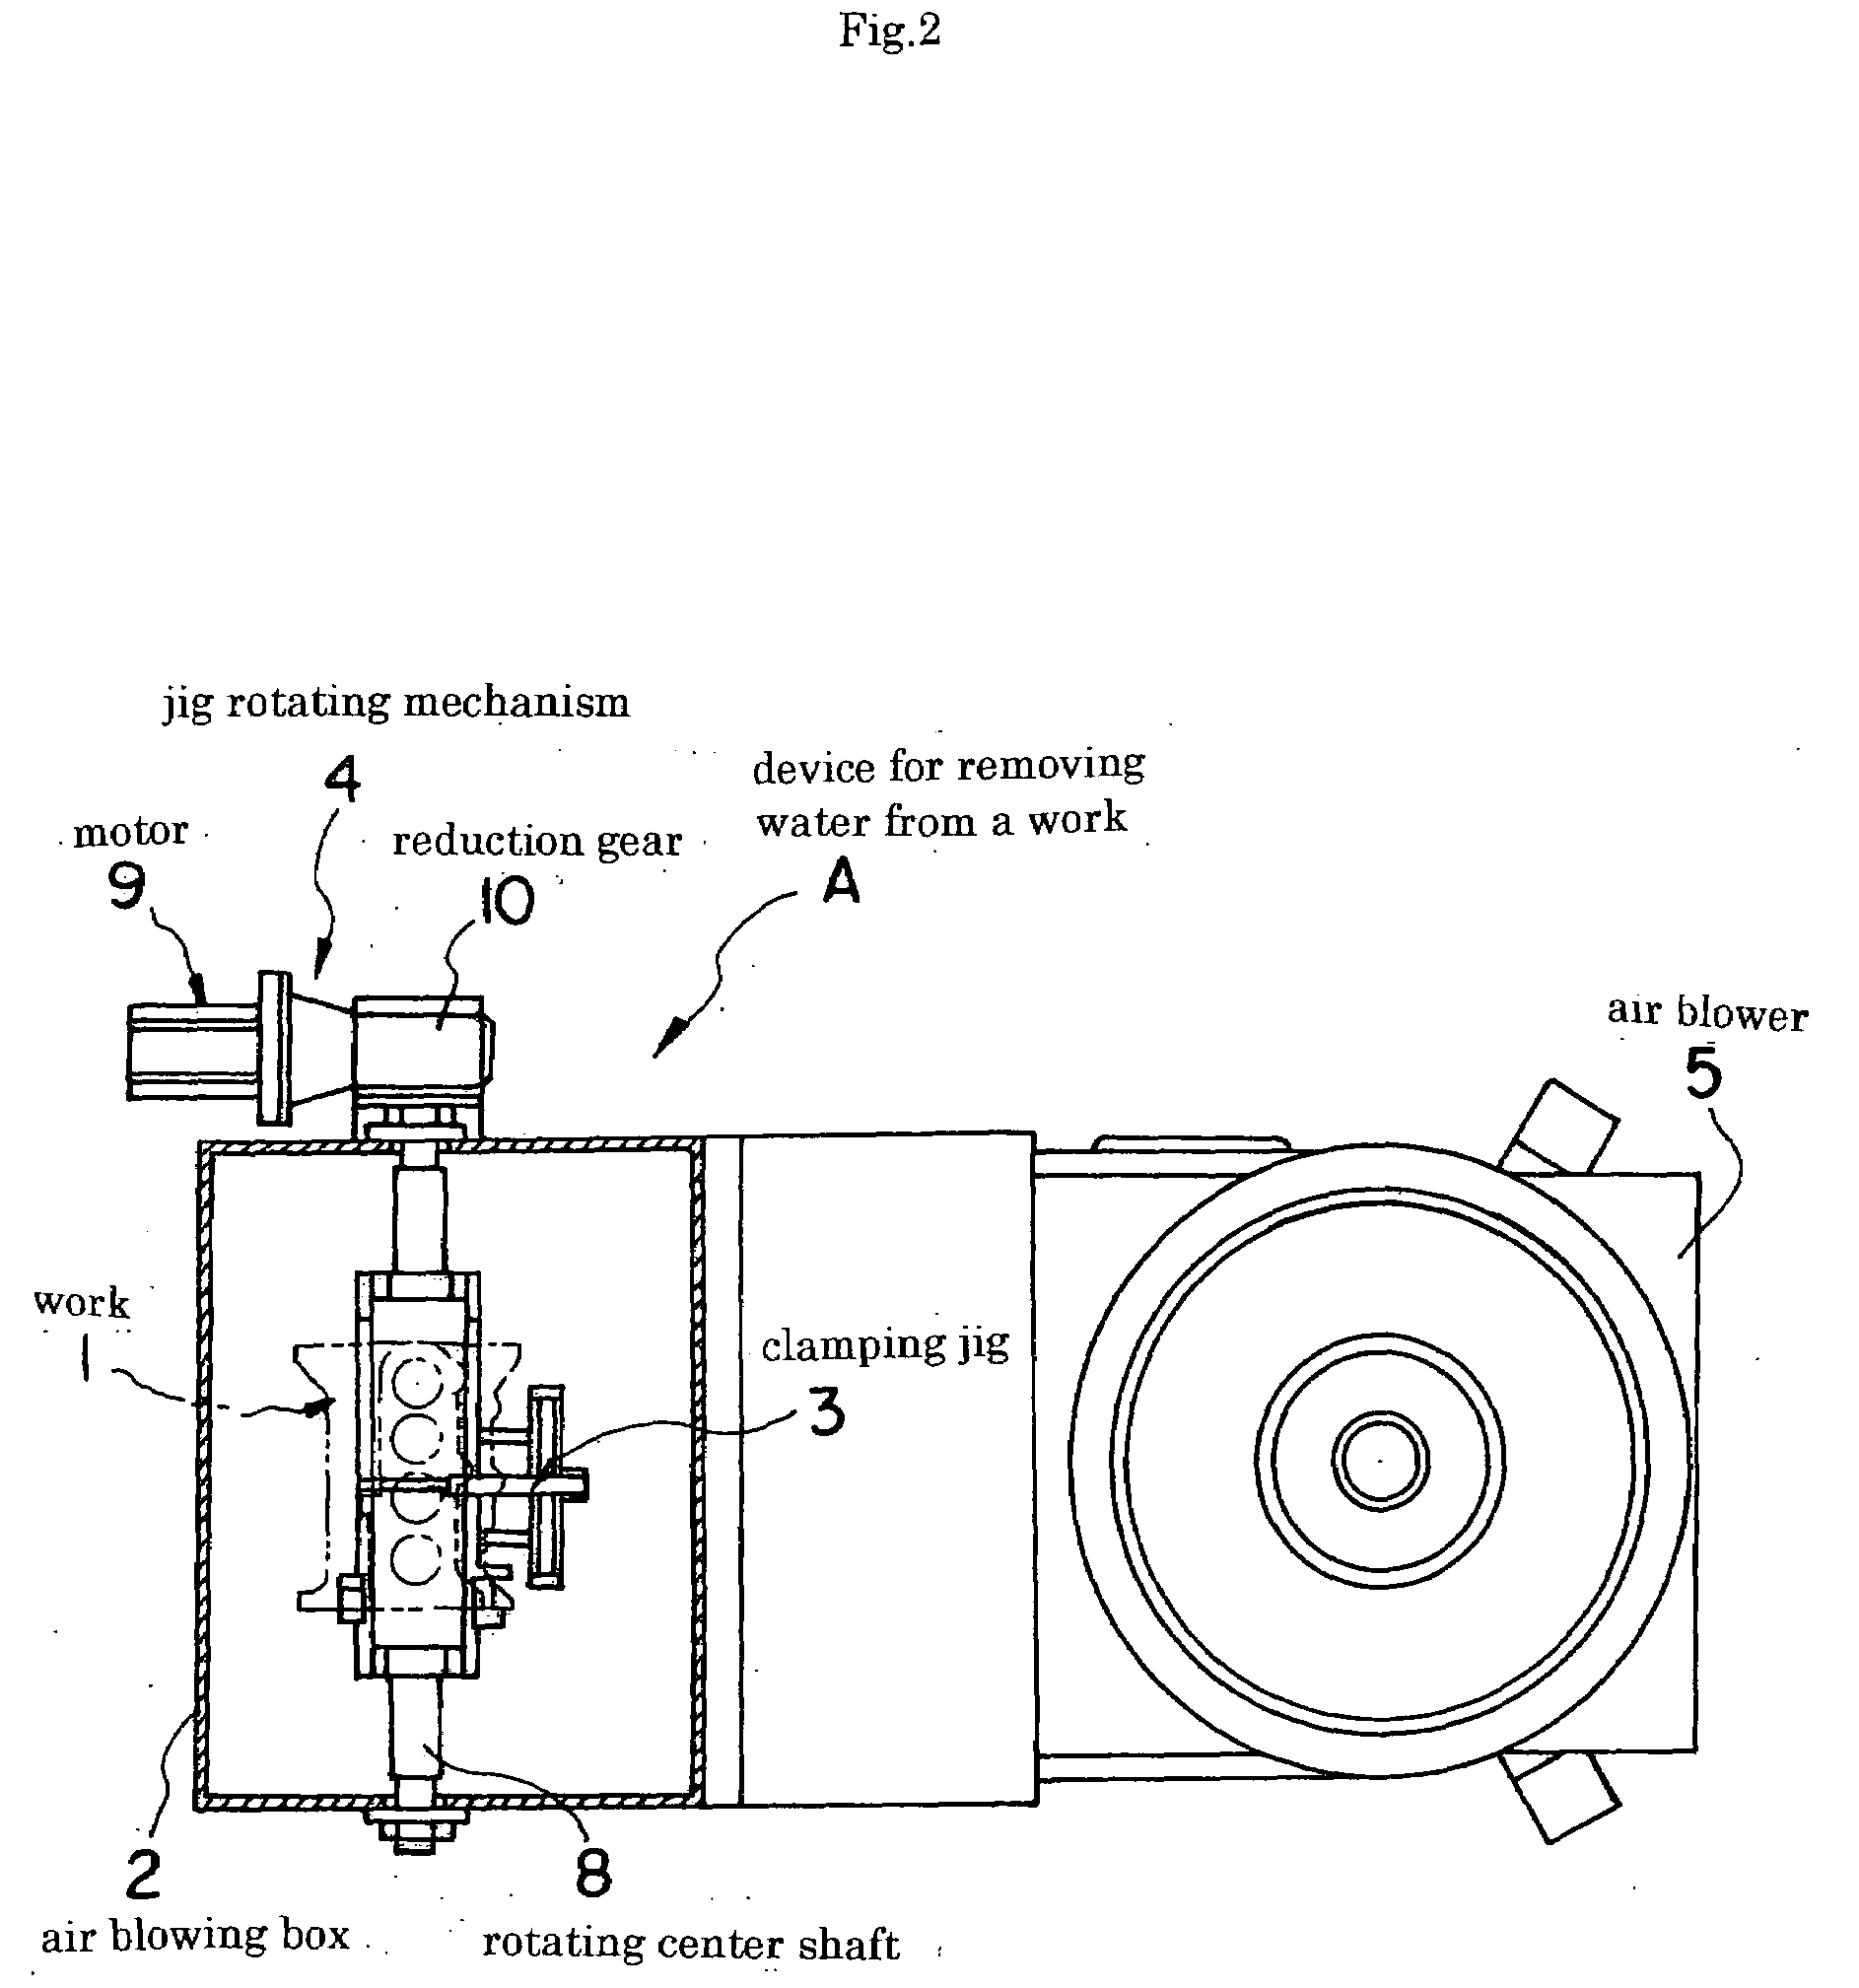 Device for removing water from a work